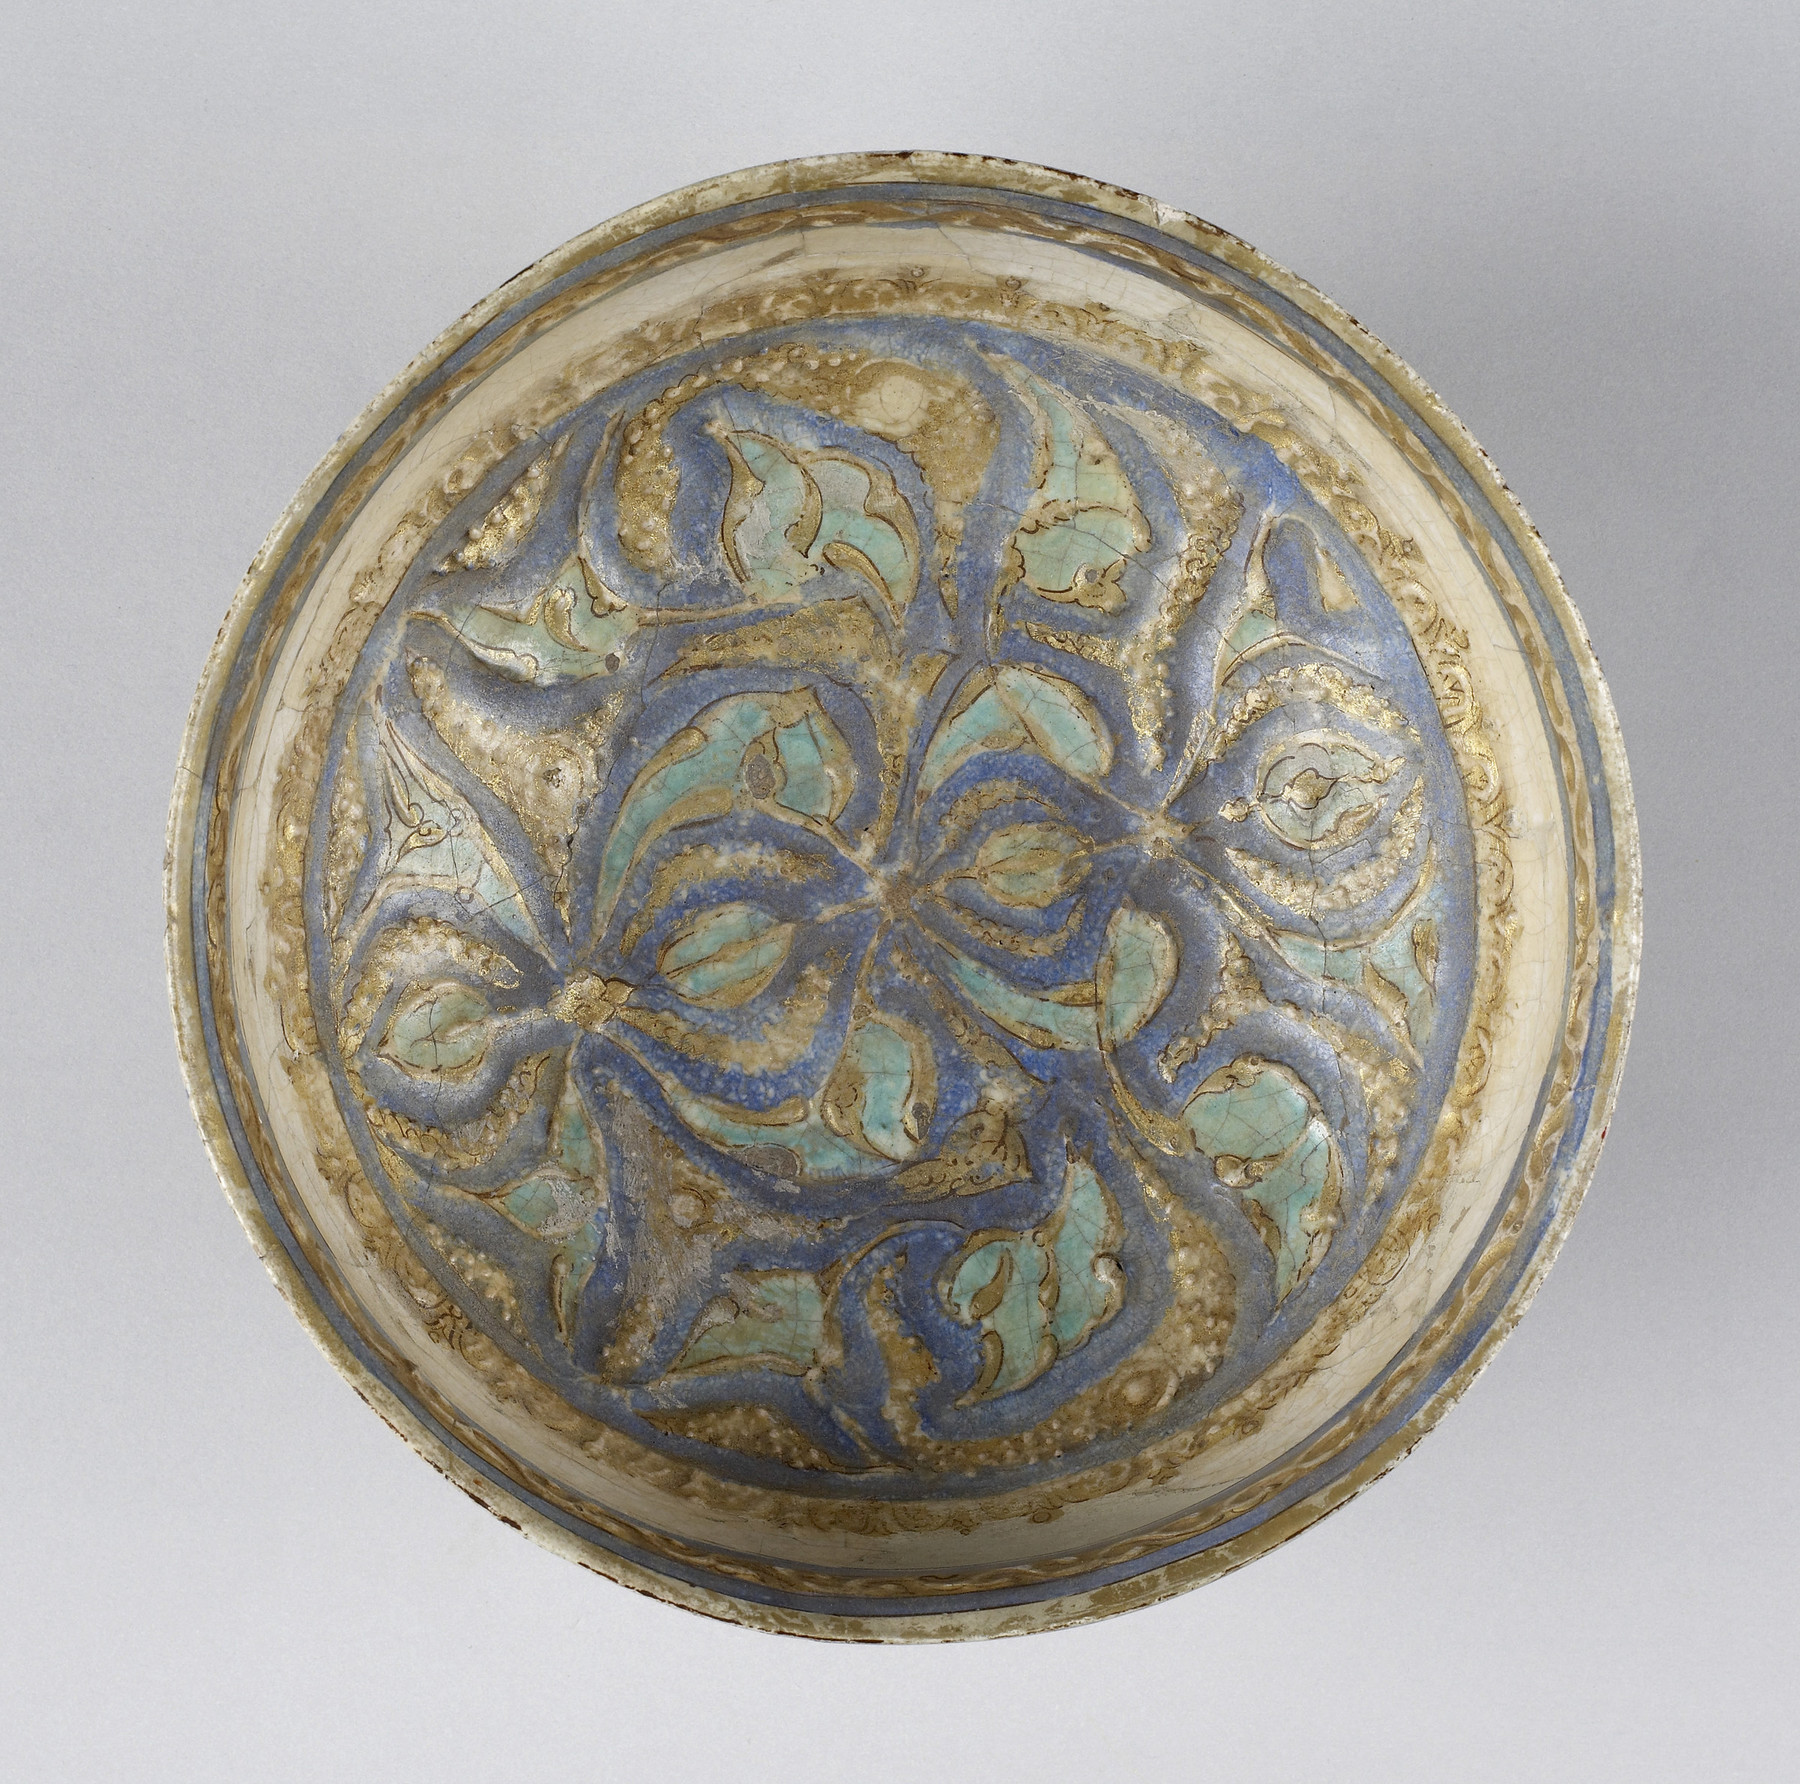 Image for Bowl with Geometric Patterns